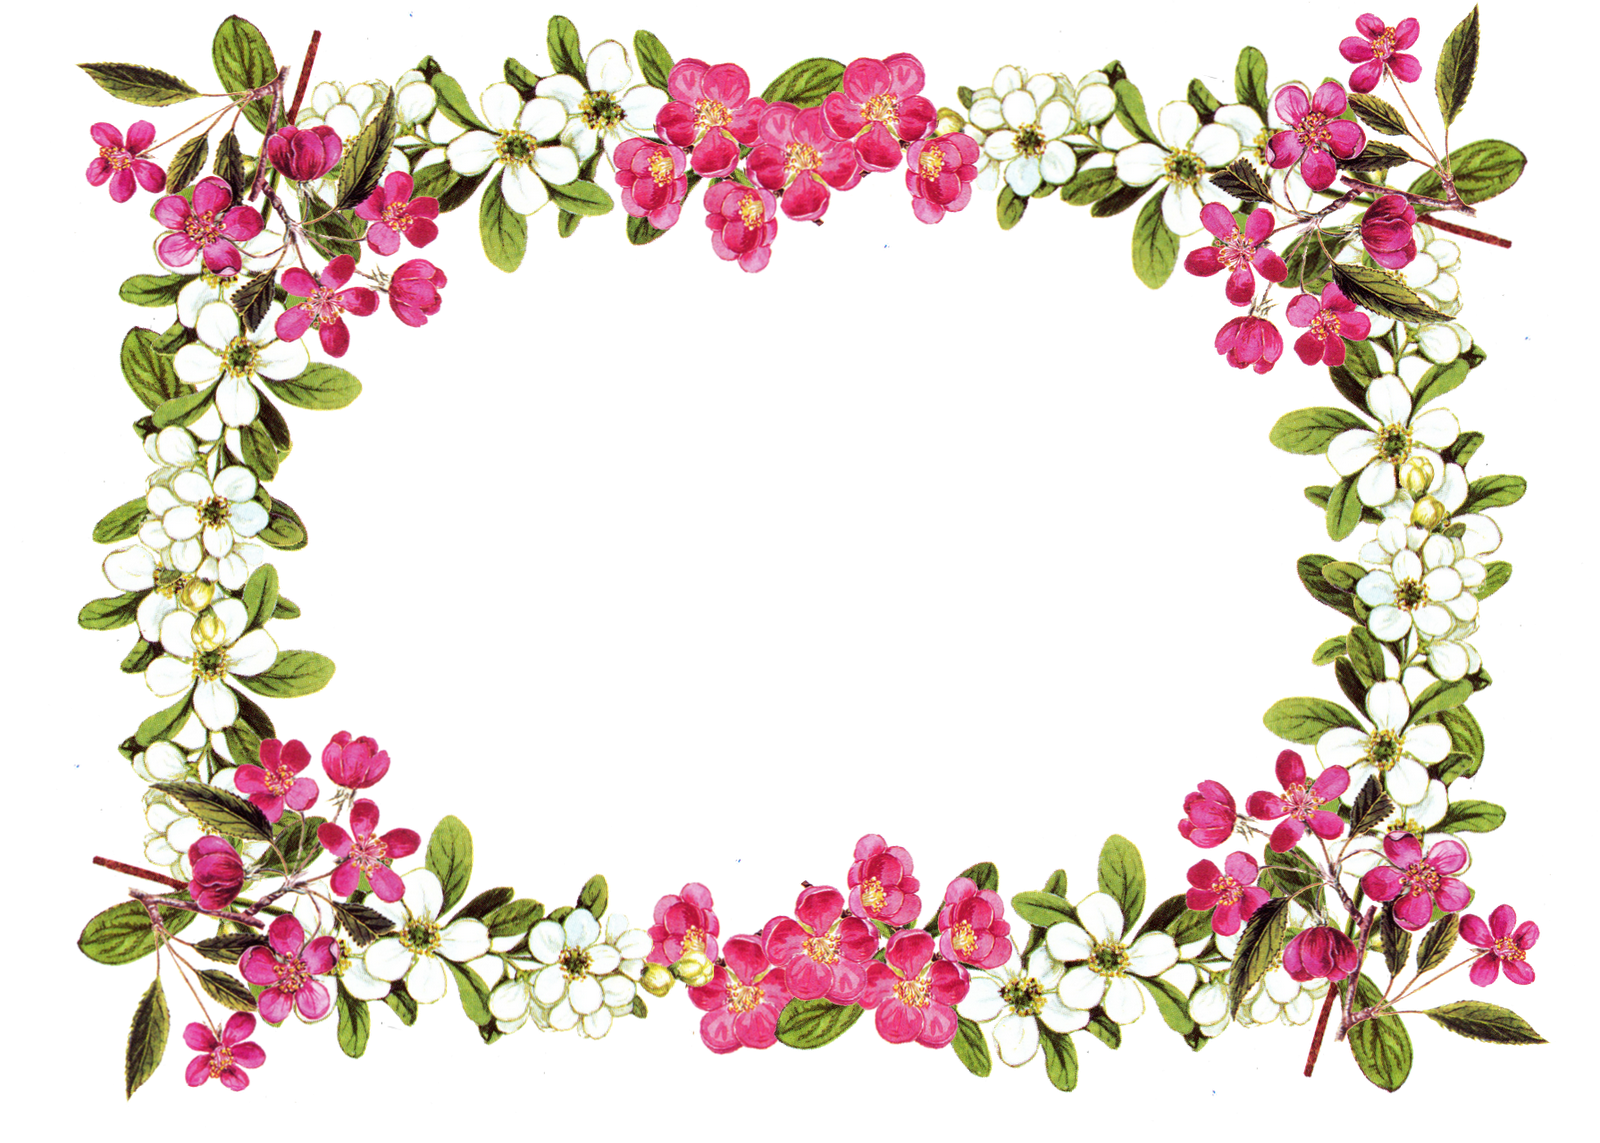 Art deco spring border clipart clipart images gallery for.